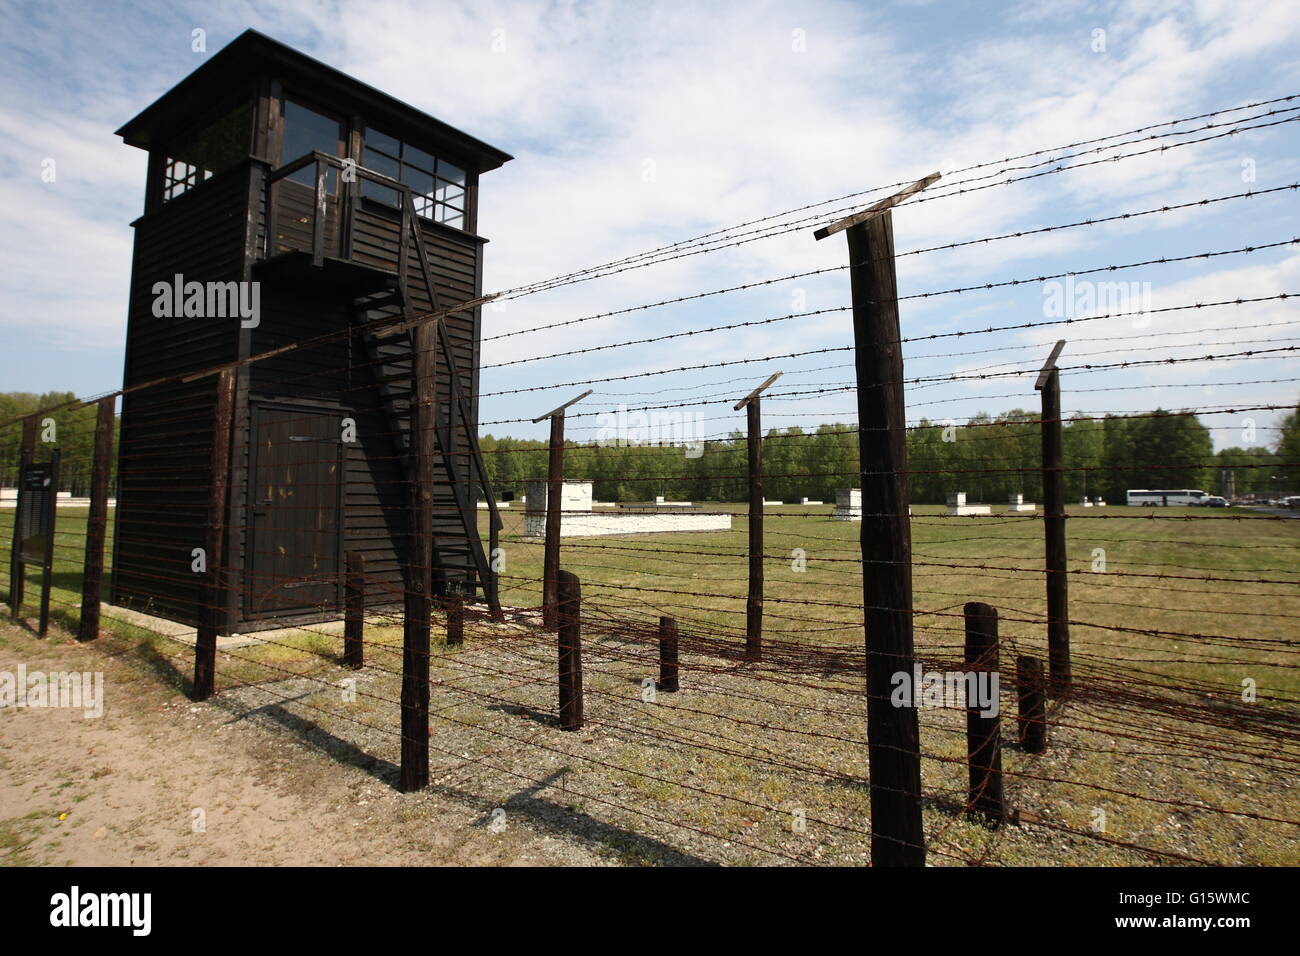 Sztutowo, Poland 9th, May 2016 People attend the 71st anniversary of the liberation of the Nazi German concentration camp, KL Stutthof in Sztutowo. The day commemorates the Soviet Army's liberation of  the Nazi concentration camp, Stutthof. Jewish camp area is seen Credit:  Michal Fludra/Alamy Live News Stock Photo